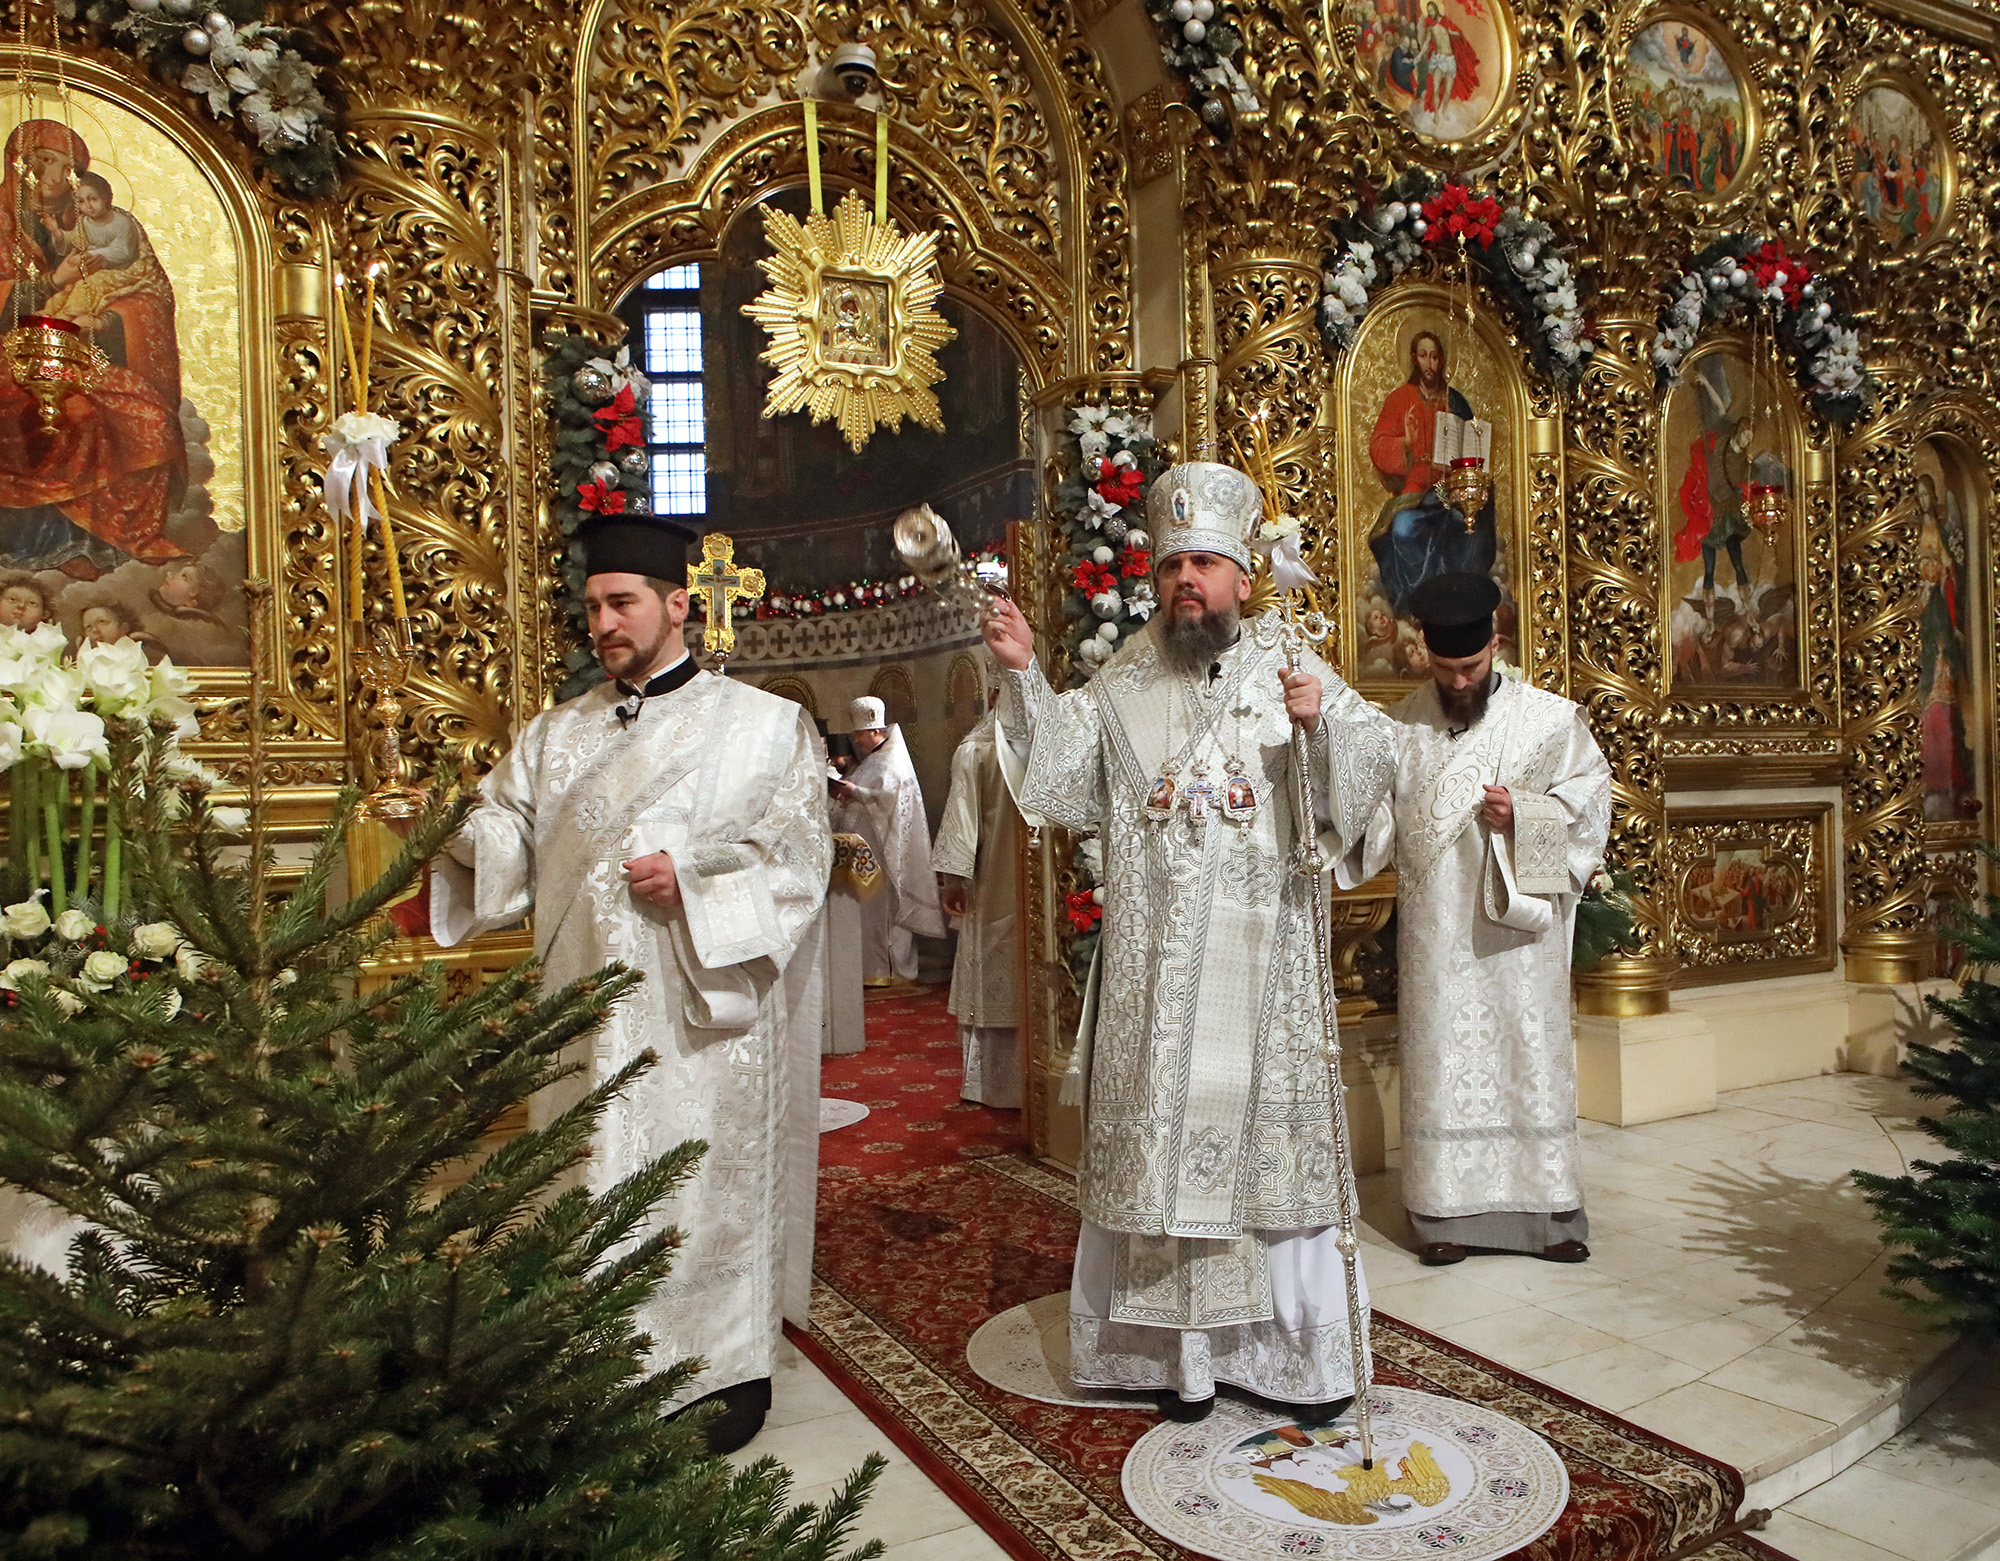 Russia announces temporary ceasefire in Ukraine for Orthodox Christmas services, Kremlin says 